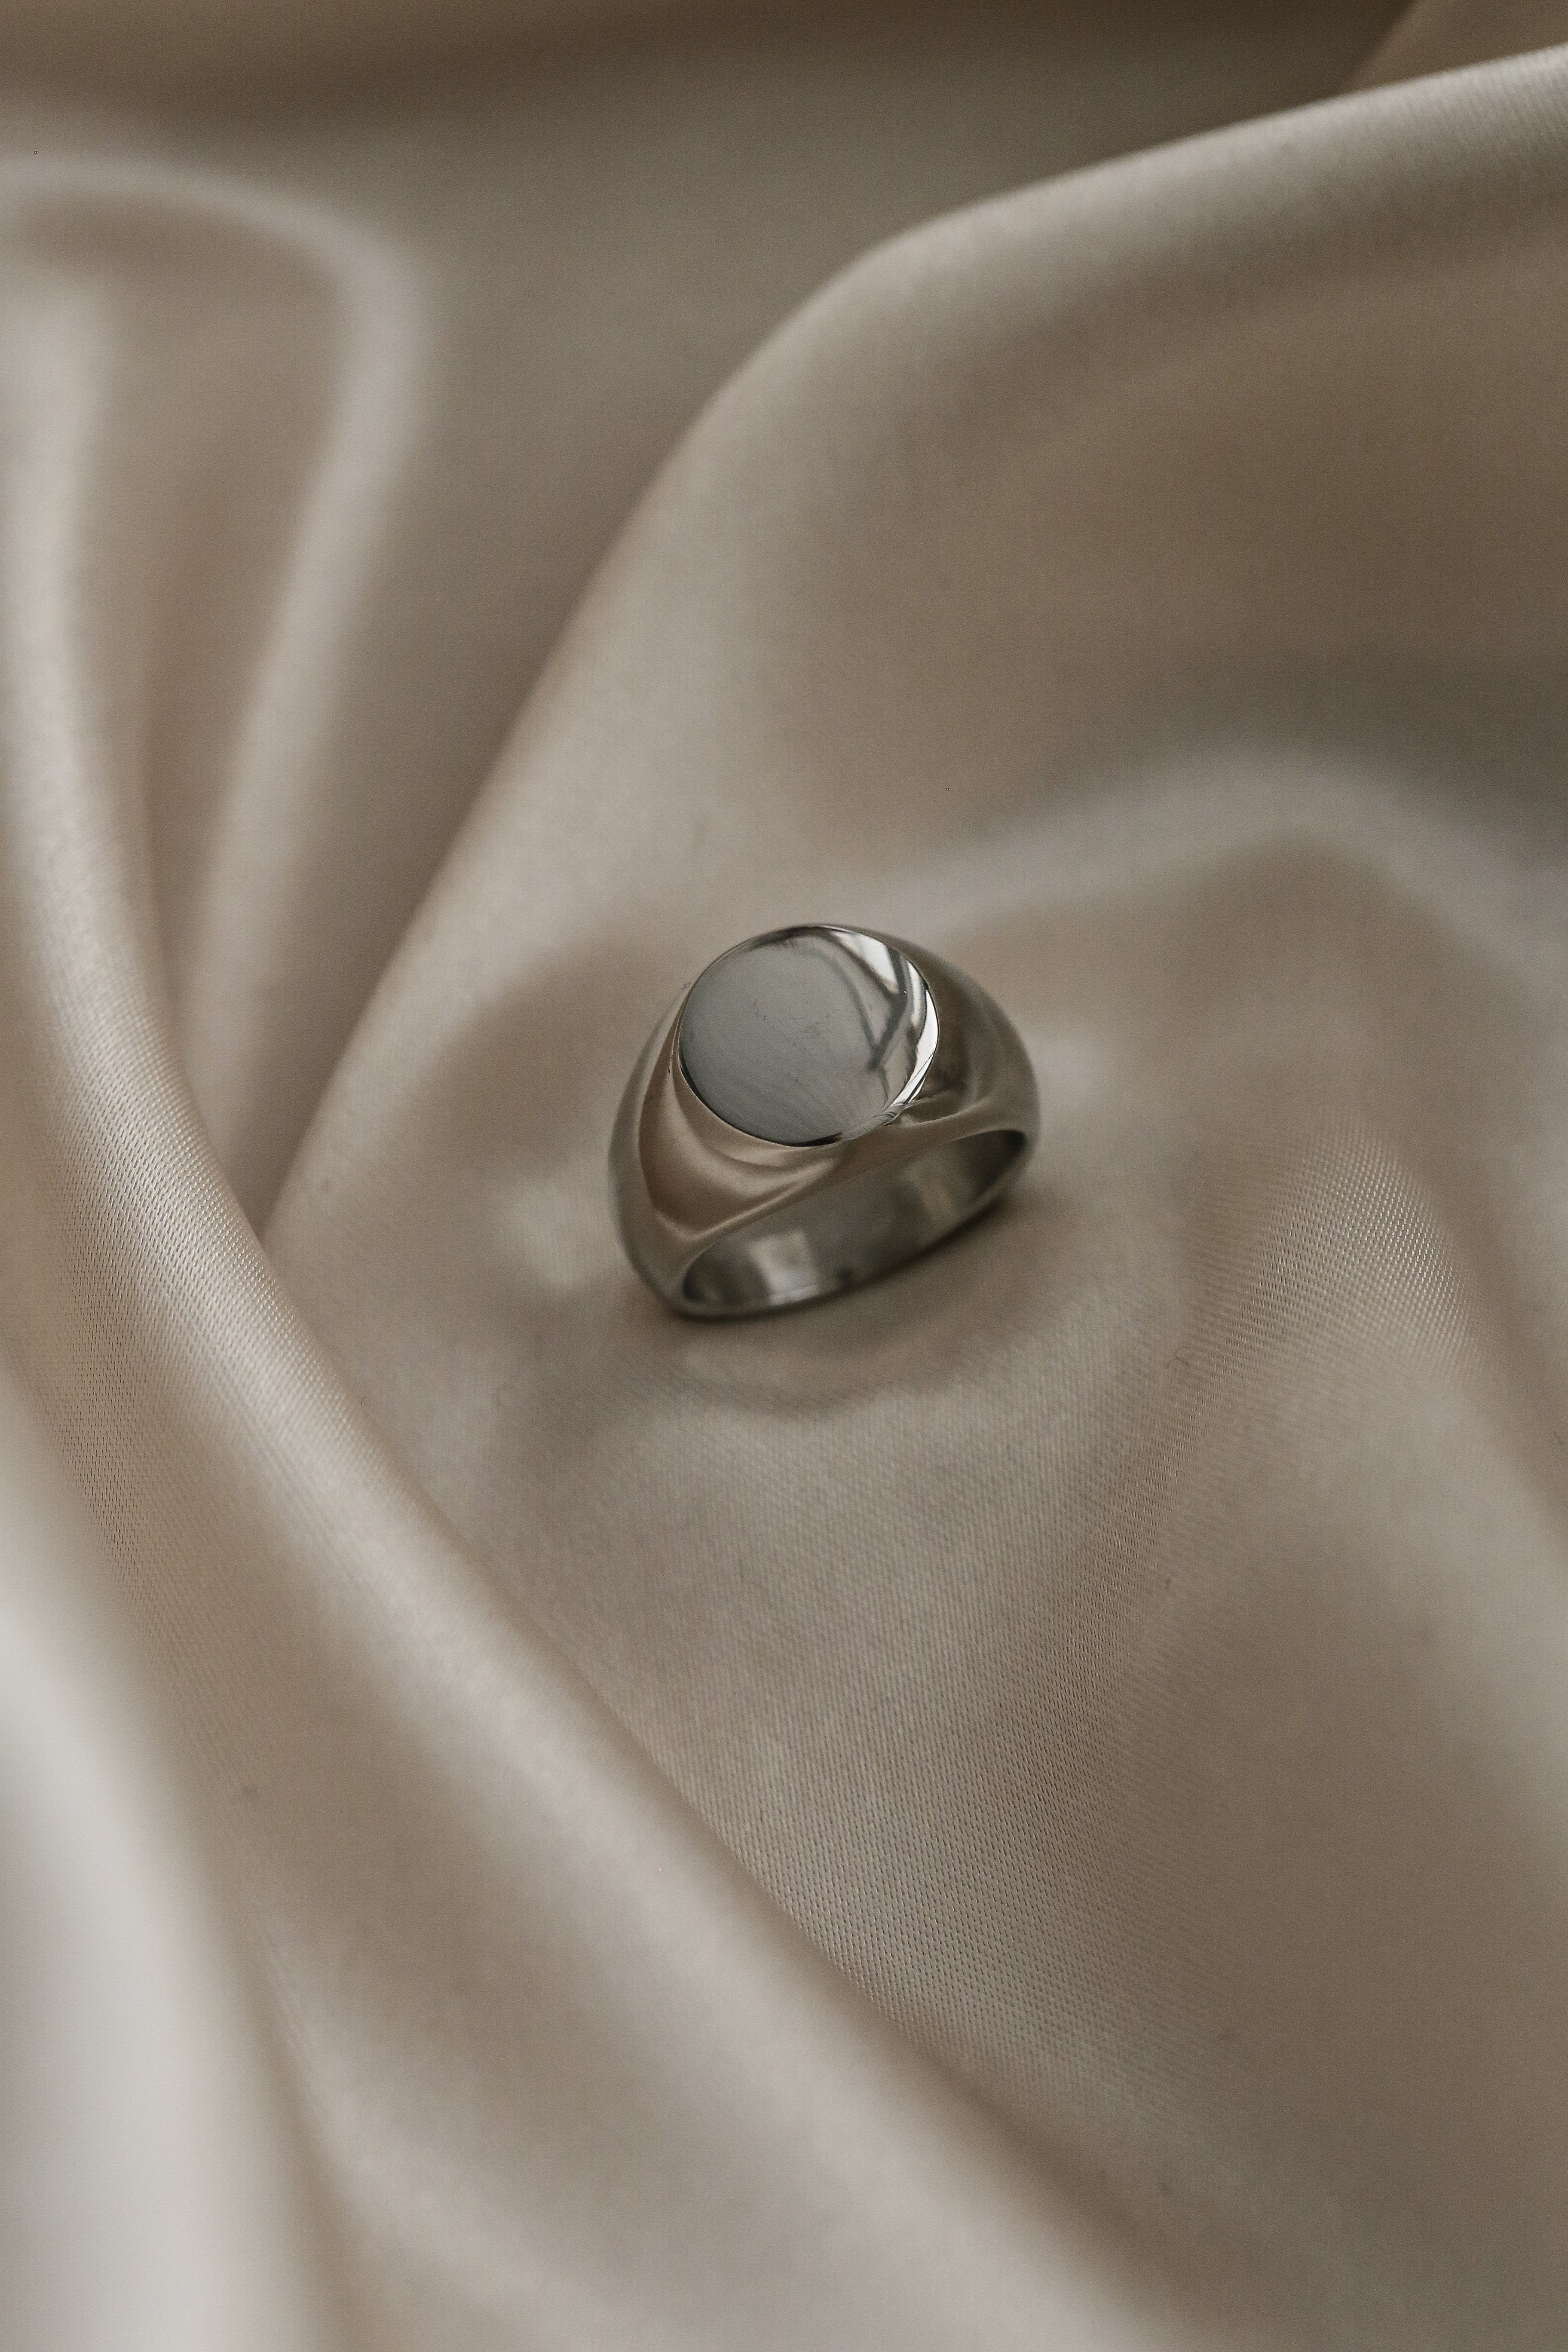 Cameron Man Ring - Boutique Minimaliste has waterproof, durable, elegant and vintage inspired jewelry